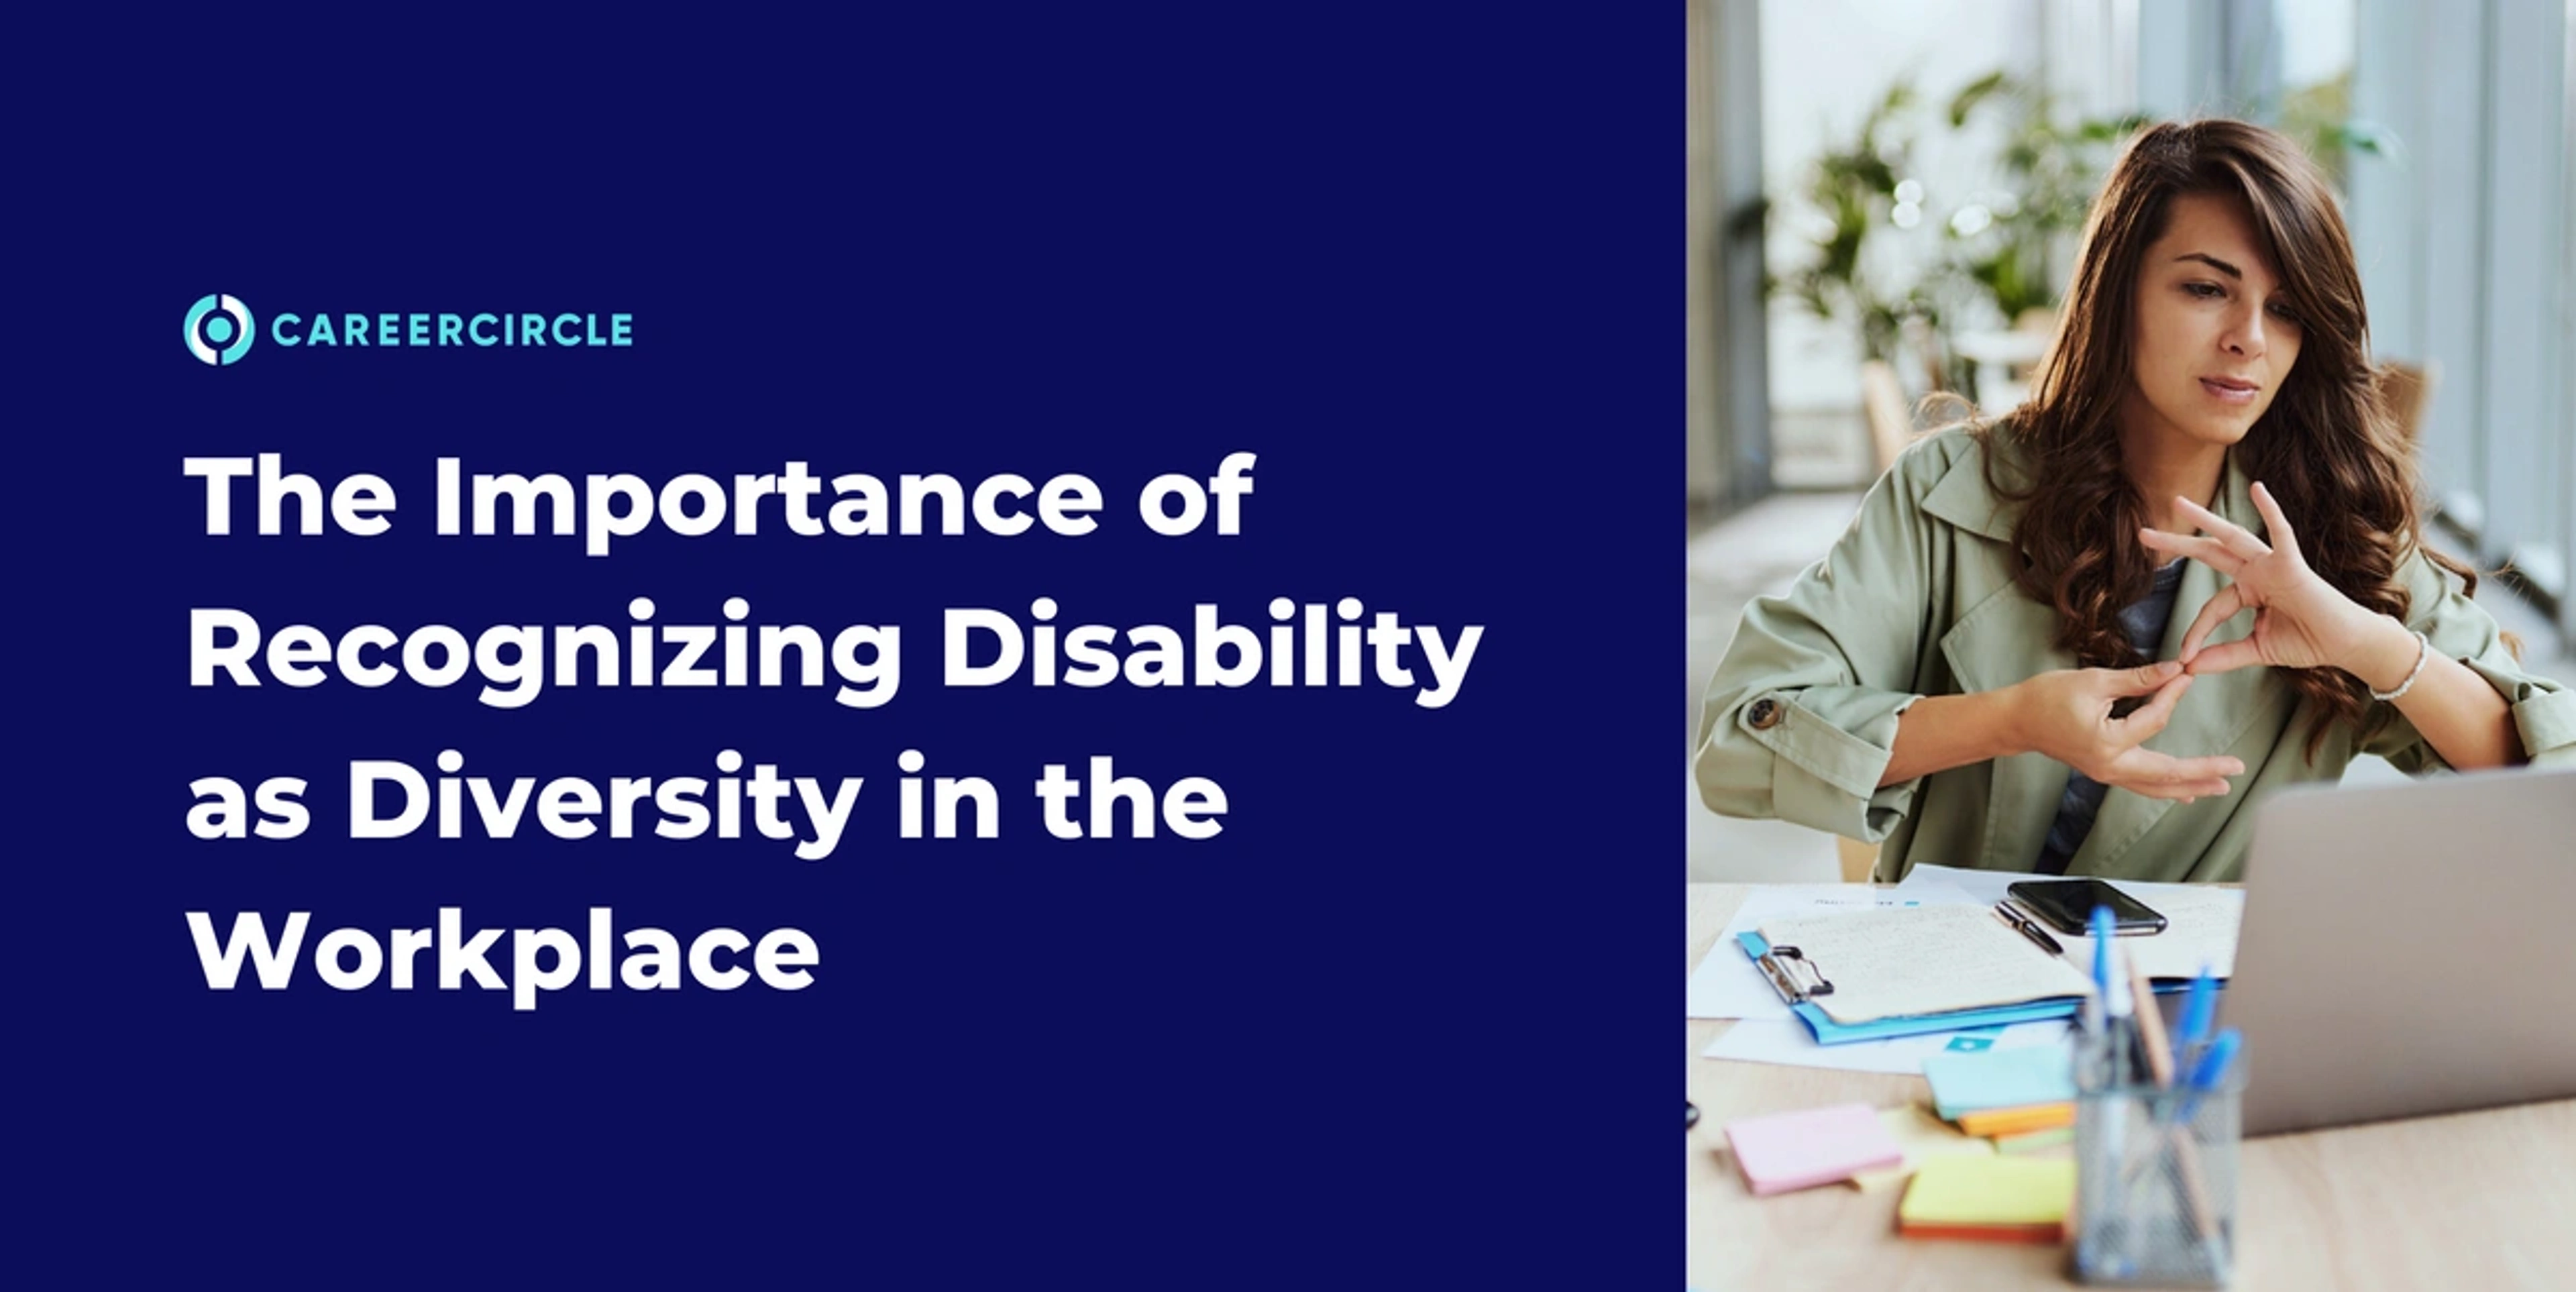 Here’s why it’s important to see disability as diversity in the workplace